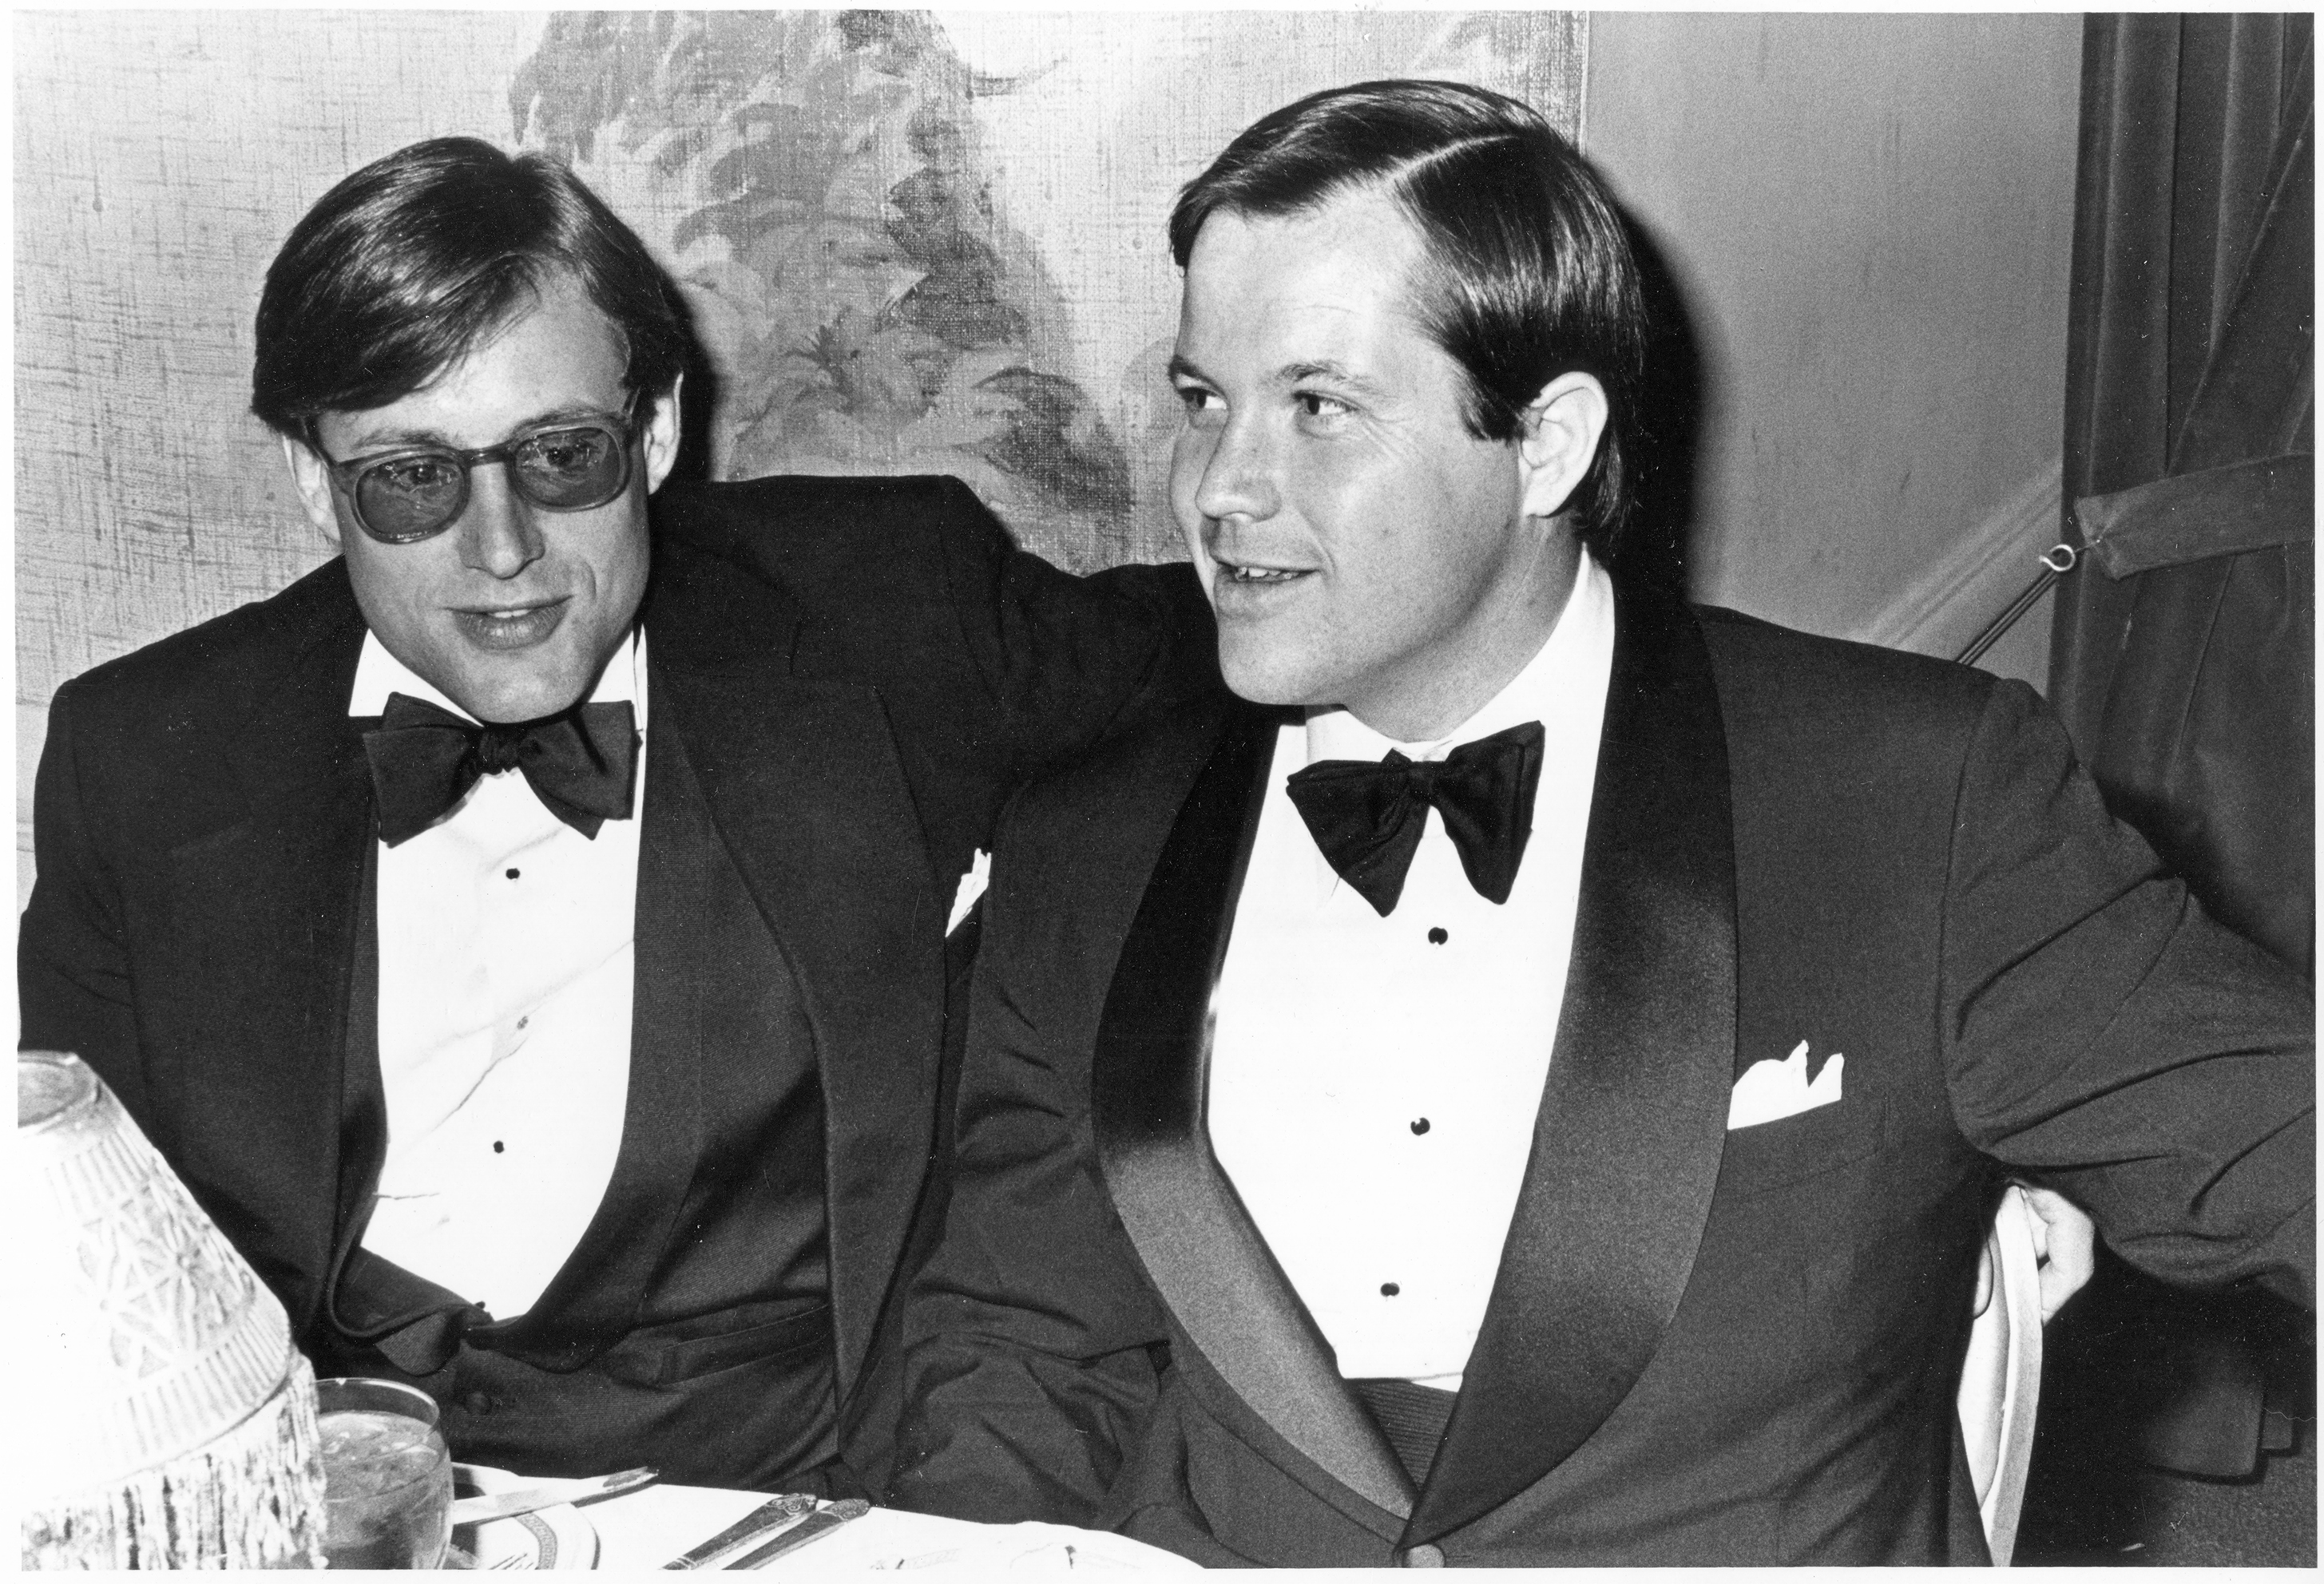 David and Rod in tuxes